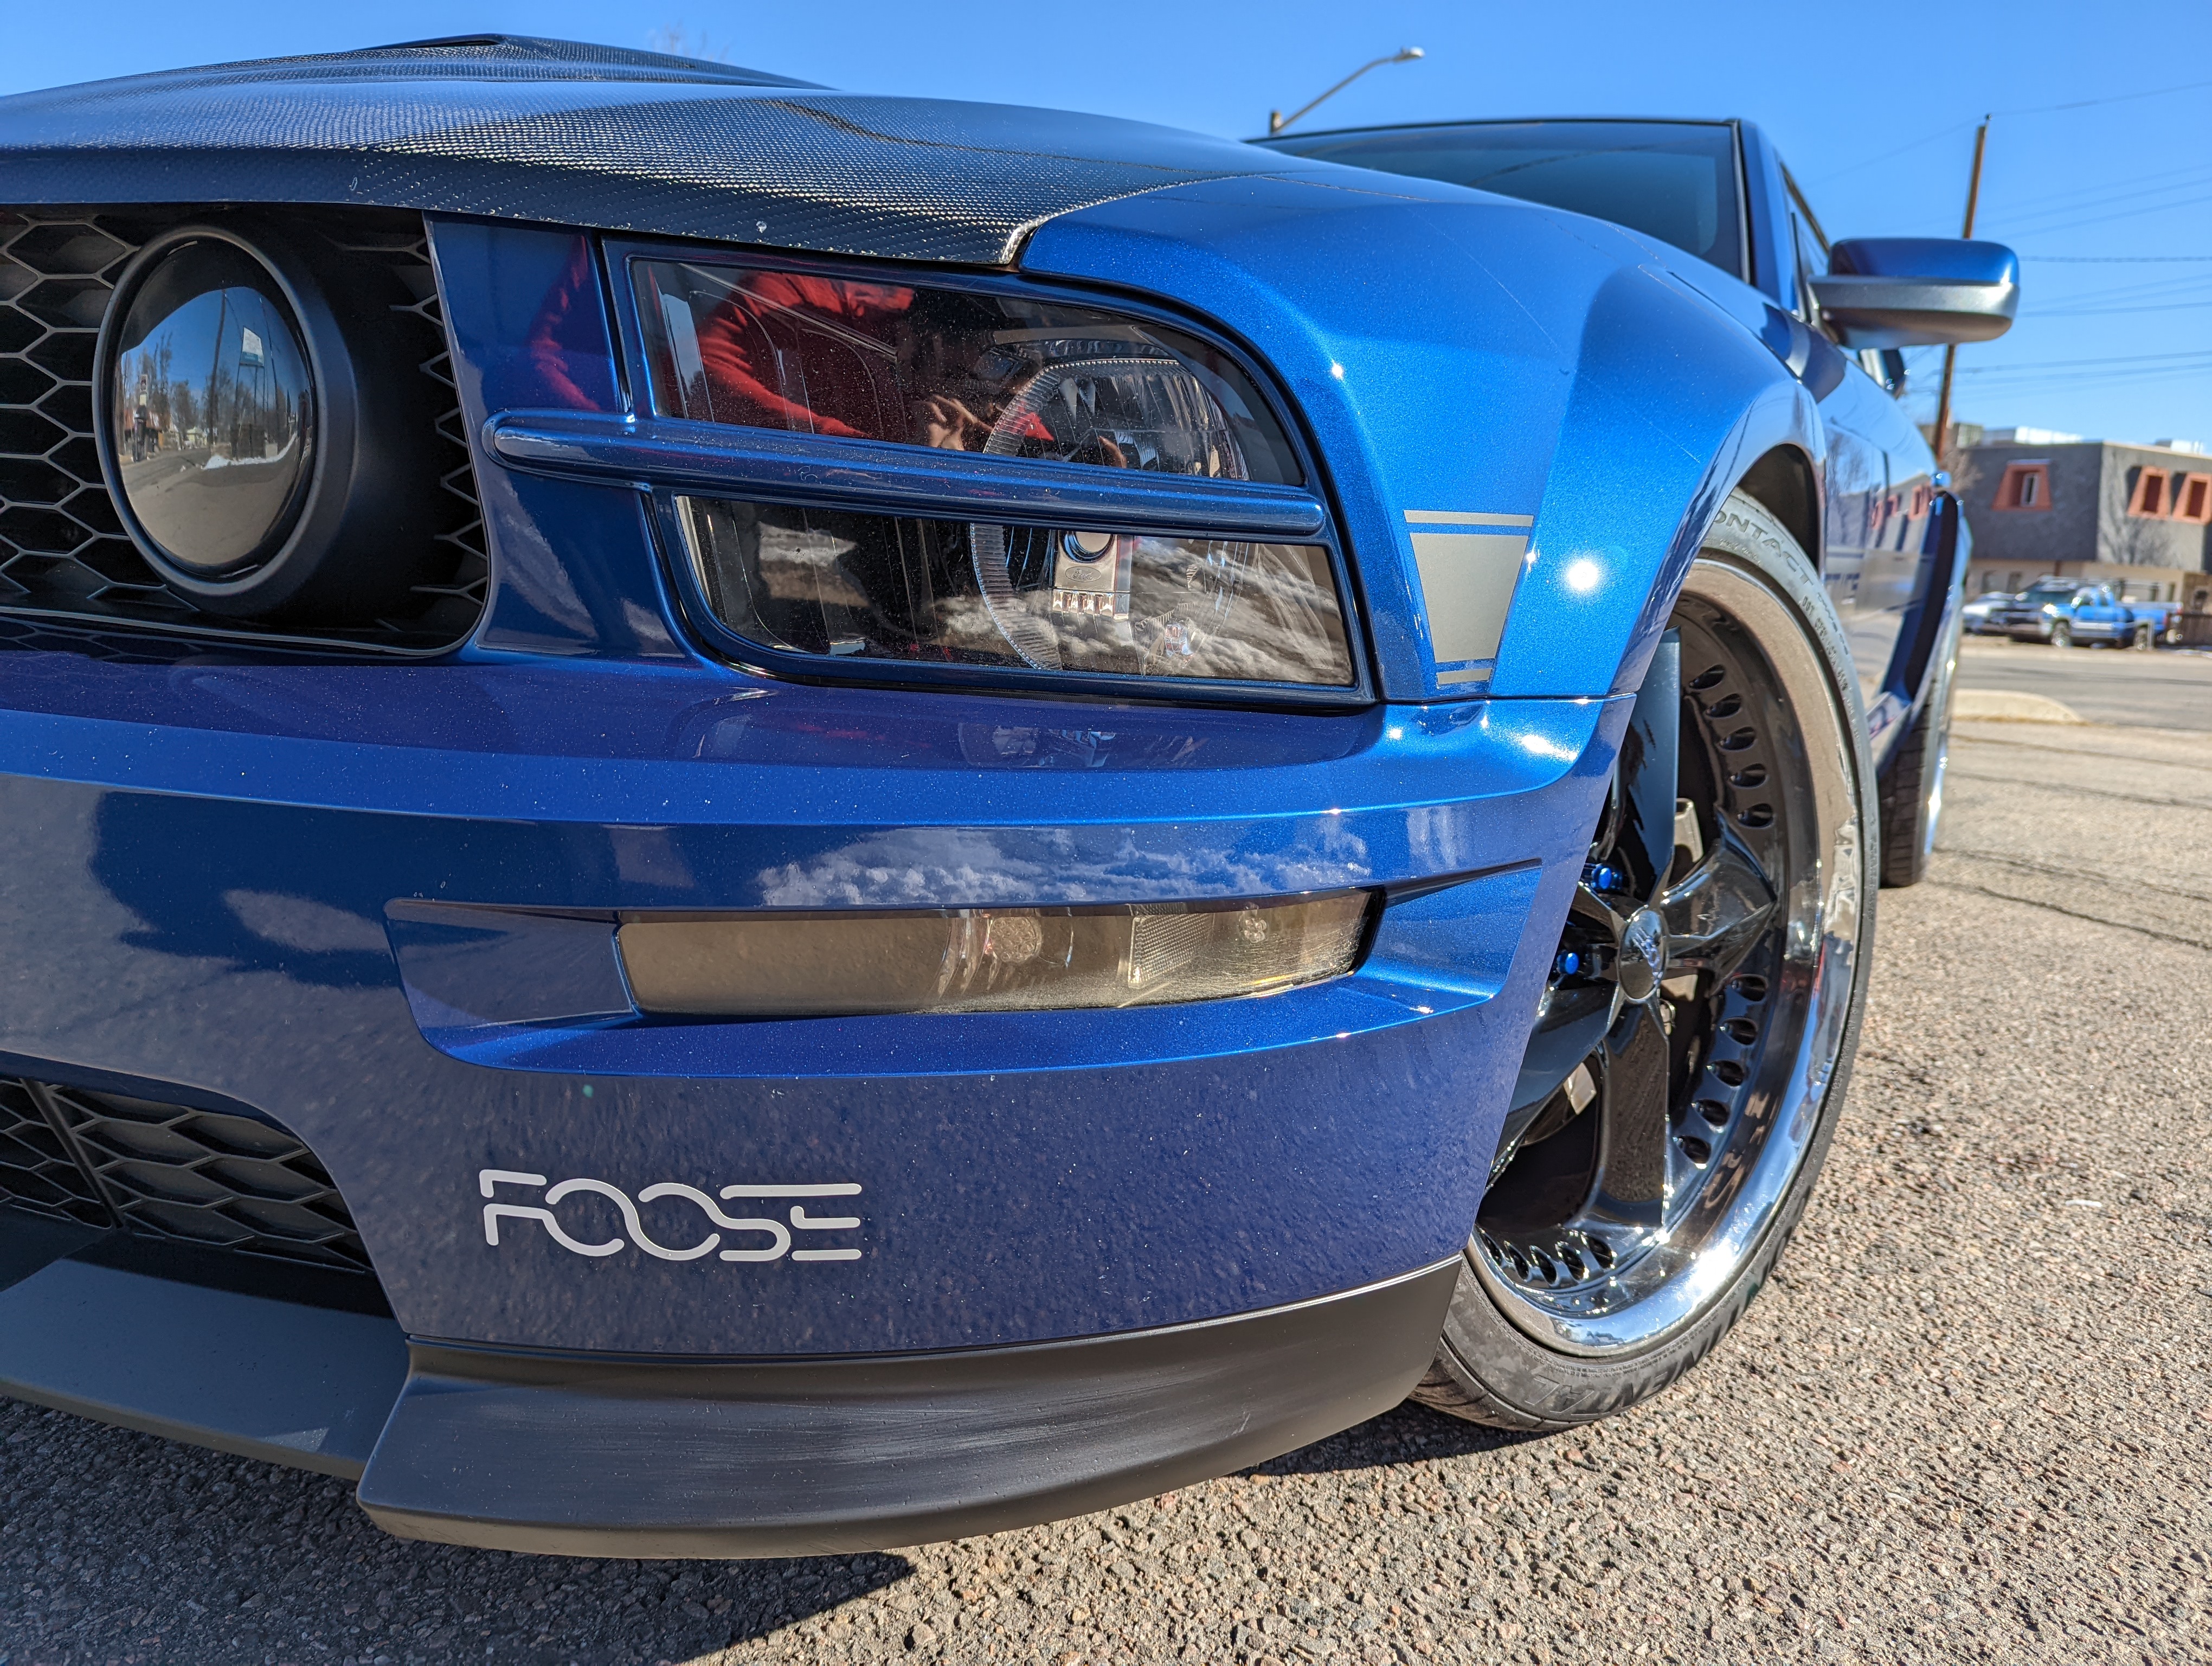 A close up of the foose decal on the finished product.